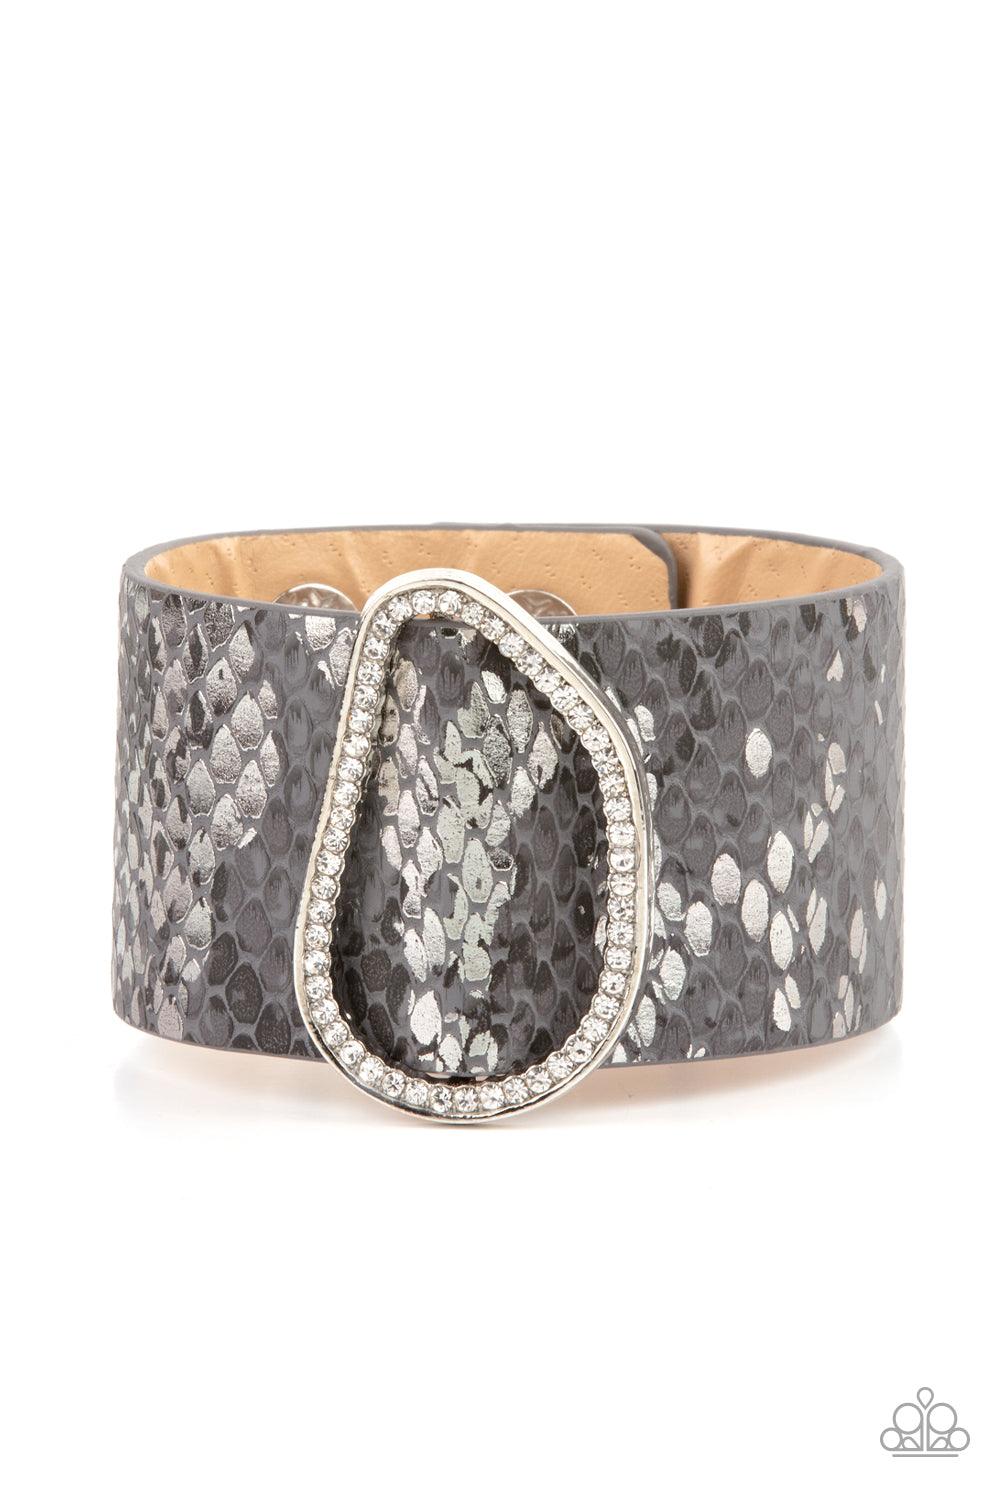 Paparazzi Accessories HISS-tory In The Making - Silver Encrusted with glassy white rhinestones, an asymmetrical silver fitting glides along a gray leather band adorned in a metallic python print for a wild look. Features an adjustable snap closure. Sold a